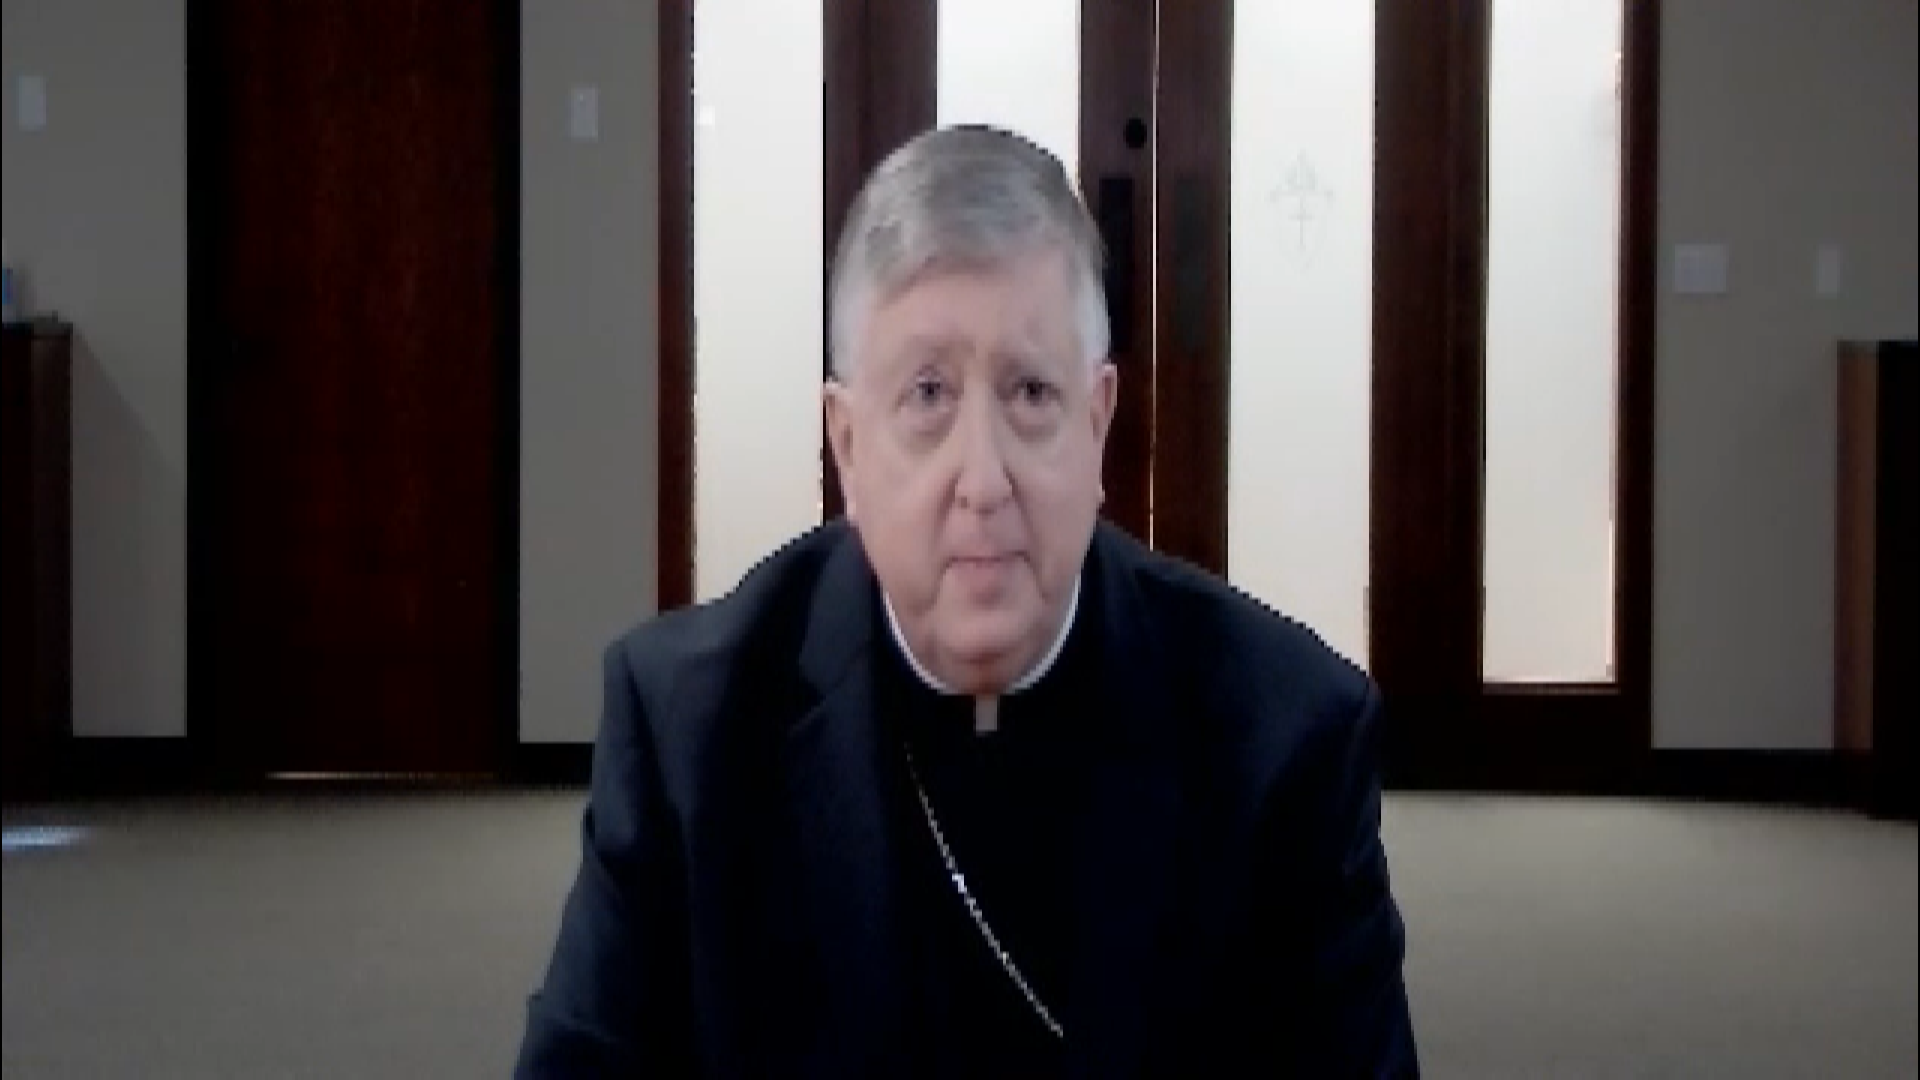 Incoming Archbishop Mitchell Rozanski spoke with 5 On Your Side's Anne Allred ahead of his installation. They talked about issues facing the Catholic church.